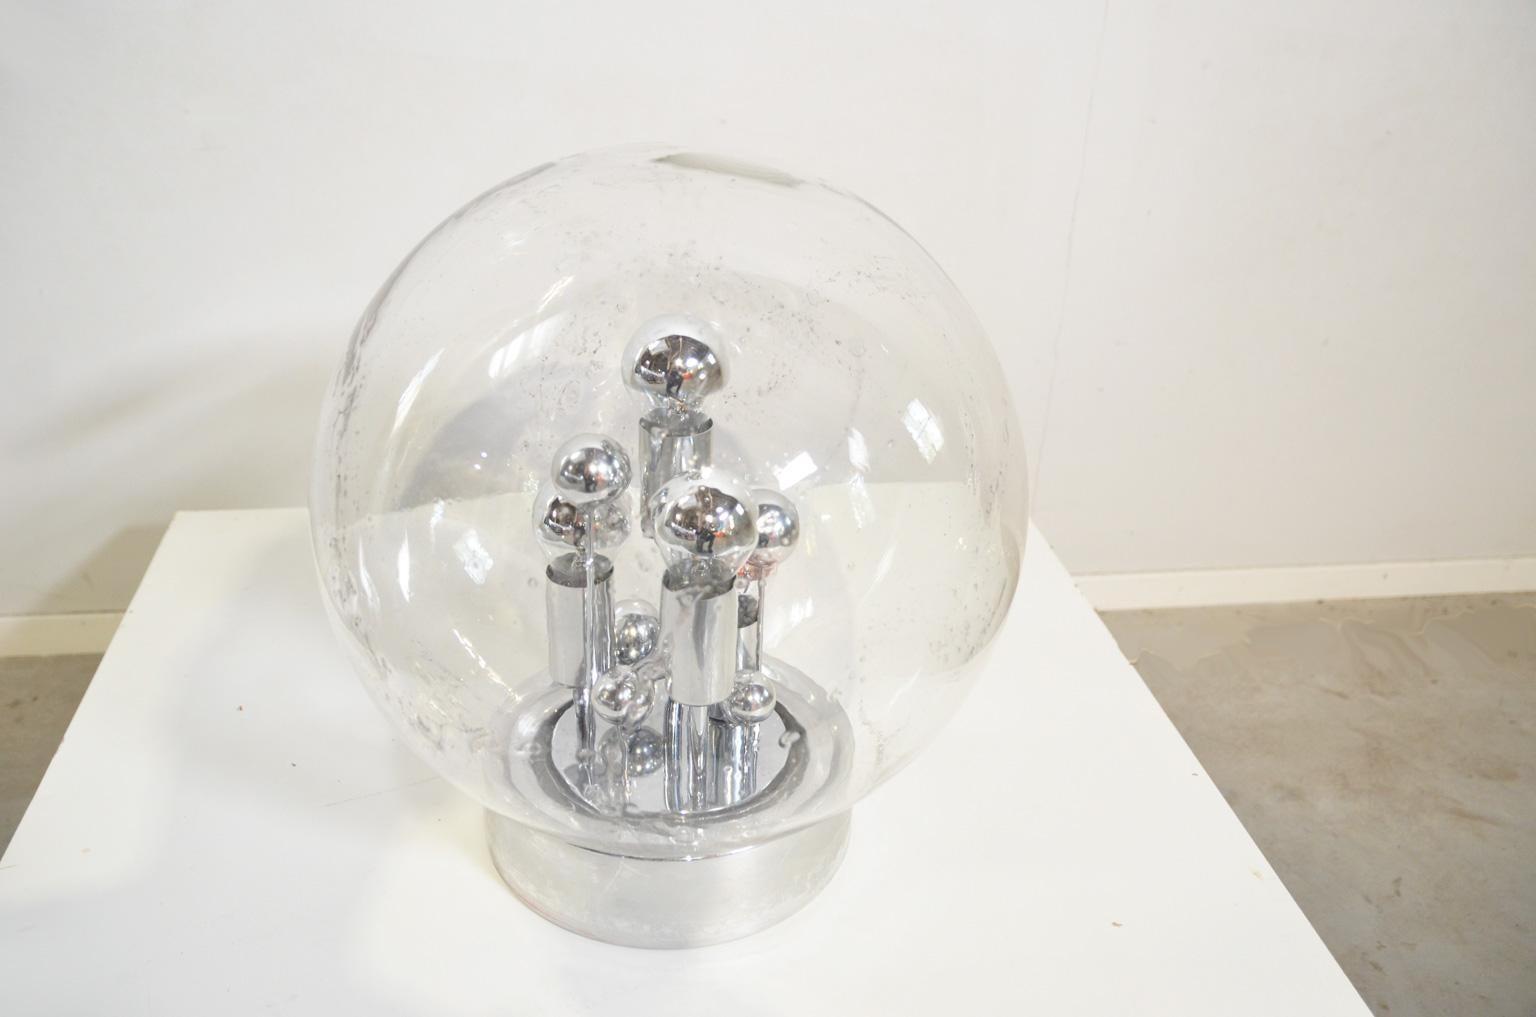 The 40 cm diameter hand blown sphere is resting on a chrome base which holds four lamp holders (E27) and some chromed spheres, all of various heights. The combination of the light bulbs, the chrome-plated spheres and the structure of the hand blown